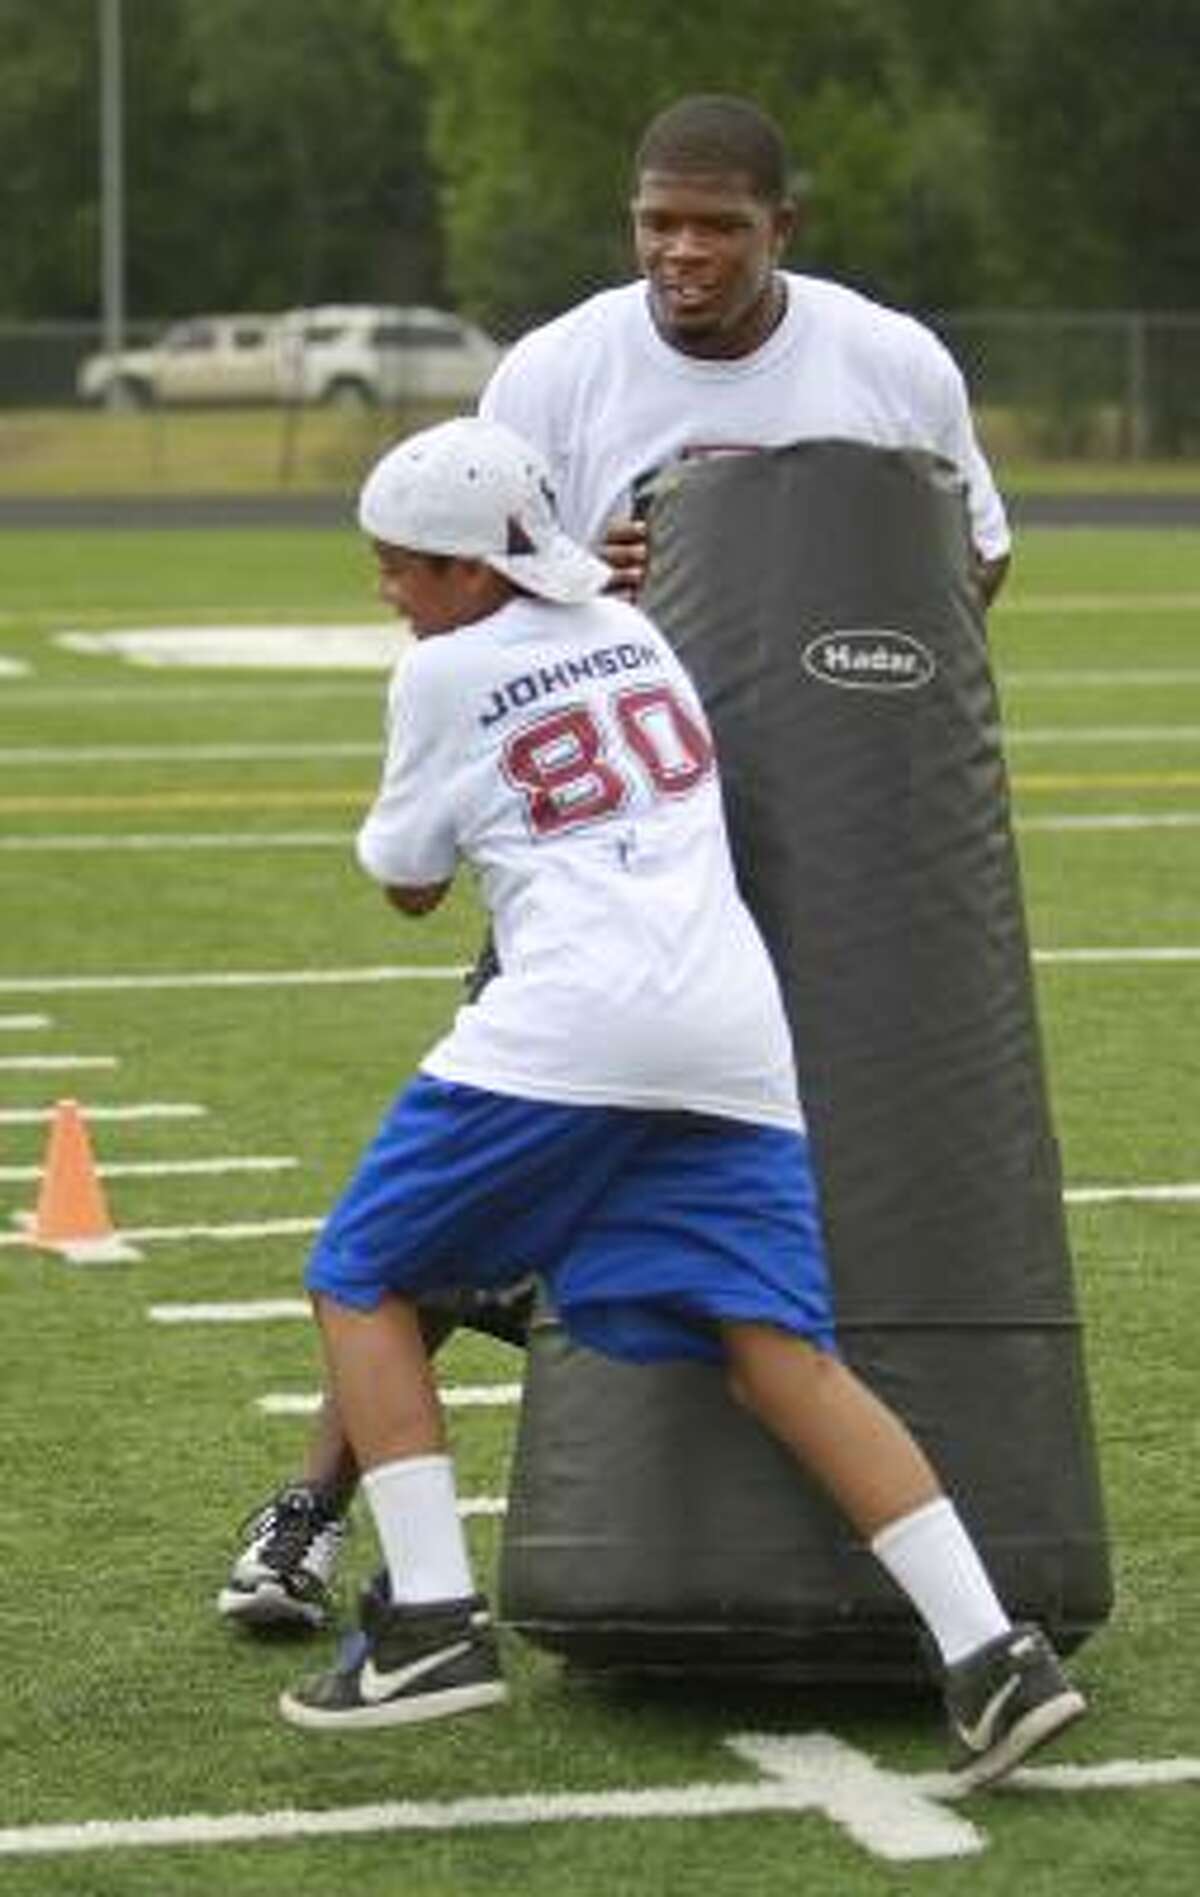 A participant in the Andre Johnson youth camp Saturday at Fort Bend Baptist Academy finds the Texans wide receiver is difficult to budge.